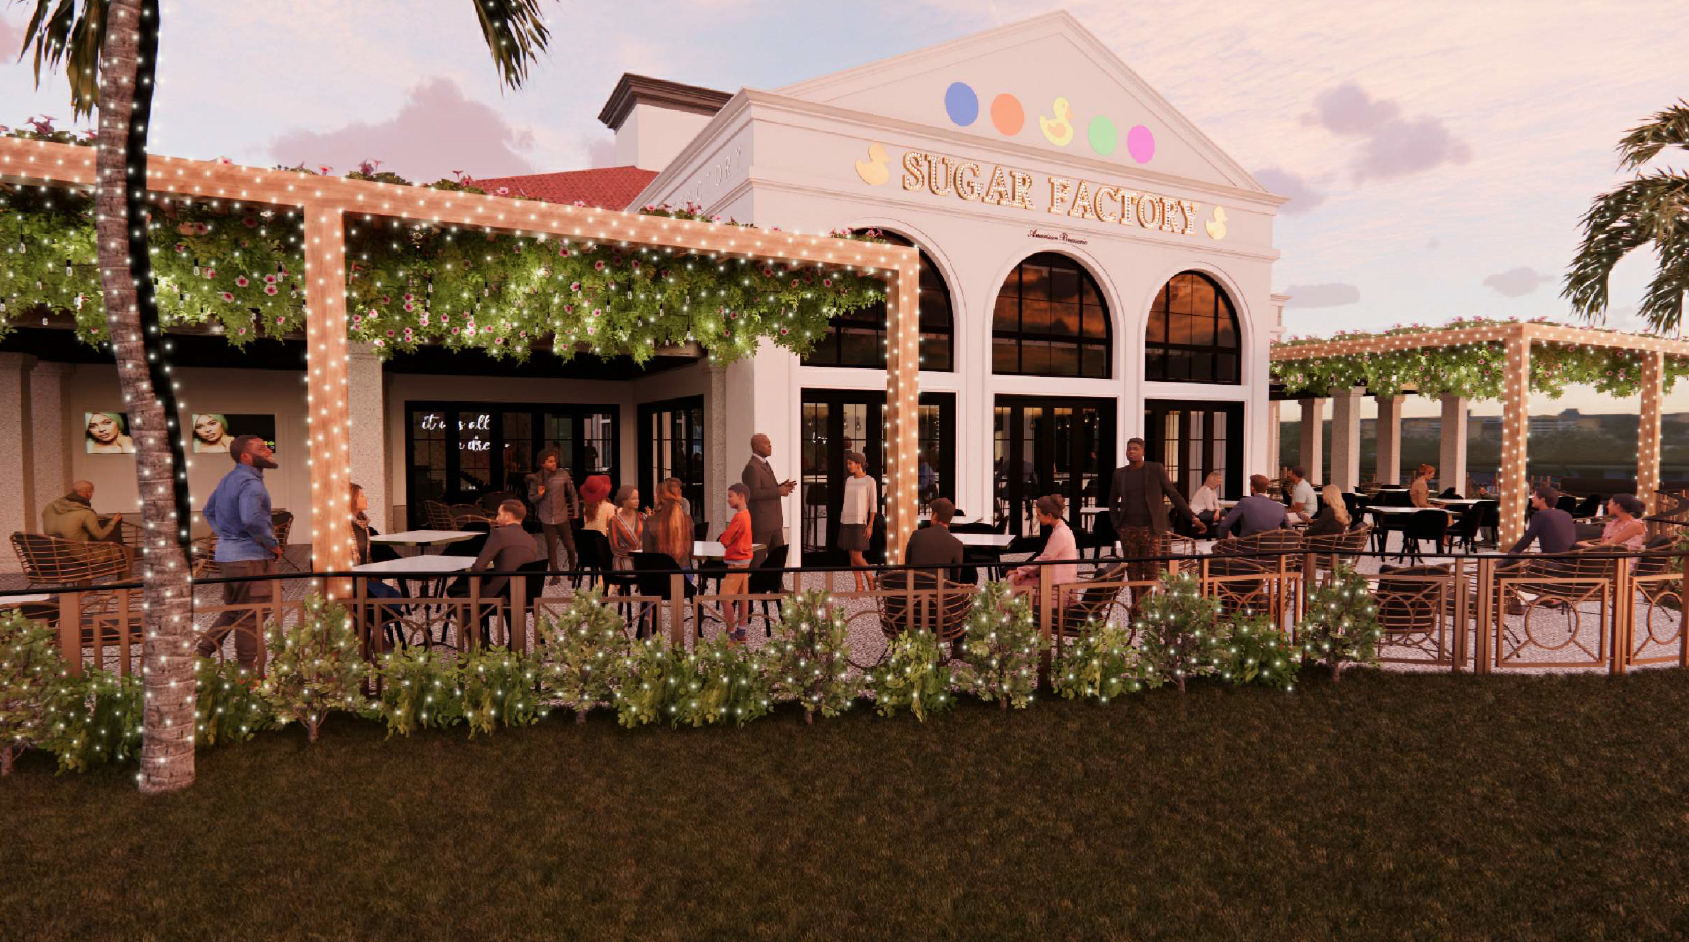 Sugar Factory American Brasserie is renovating and leasing the closed Brio Tuscan Grille at 4910 Big Island Drive.